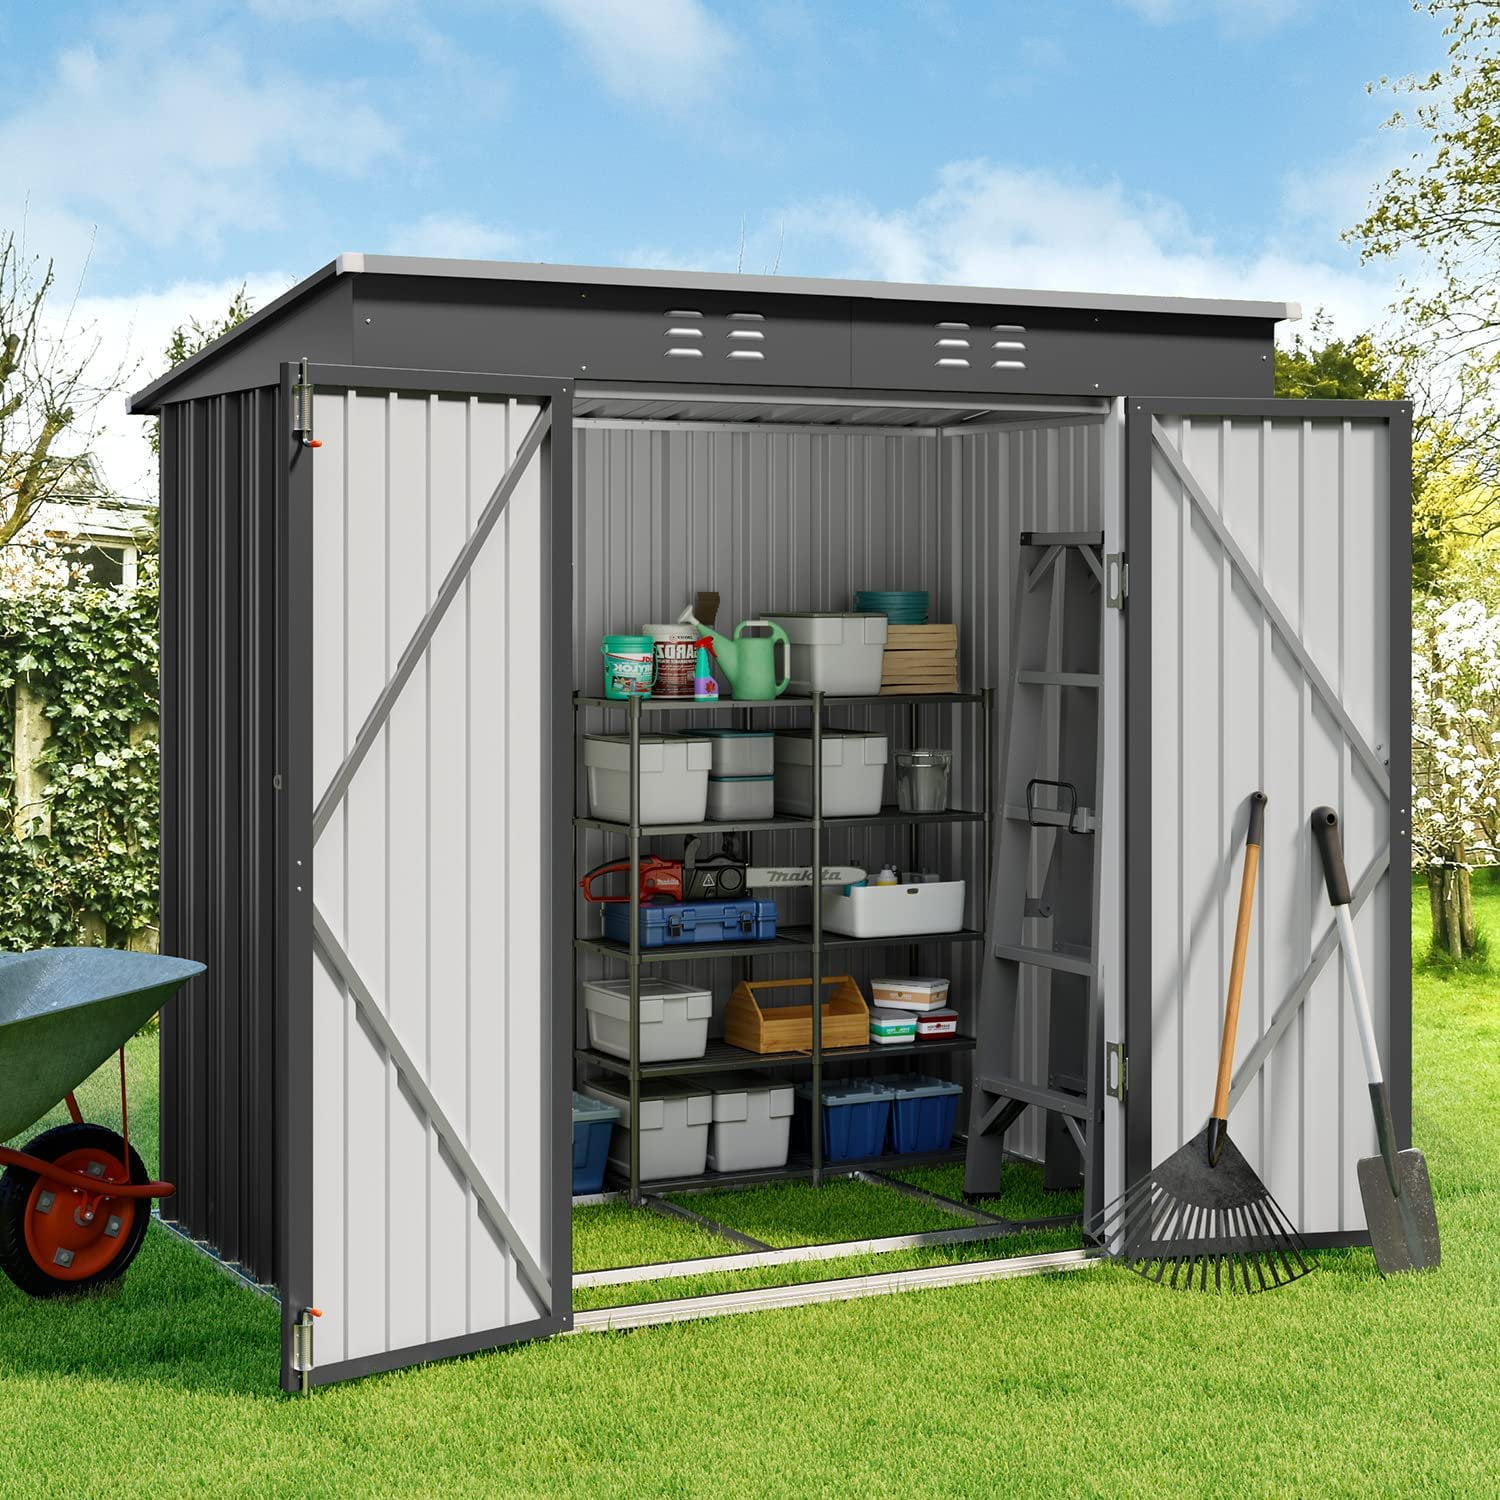 Aiho 6ft x 4ft Metal Garden Shed for Outdoor Storage